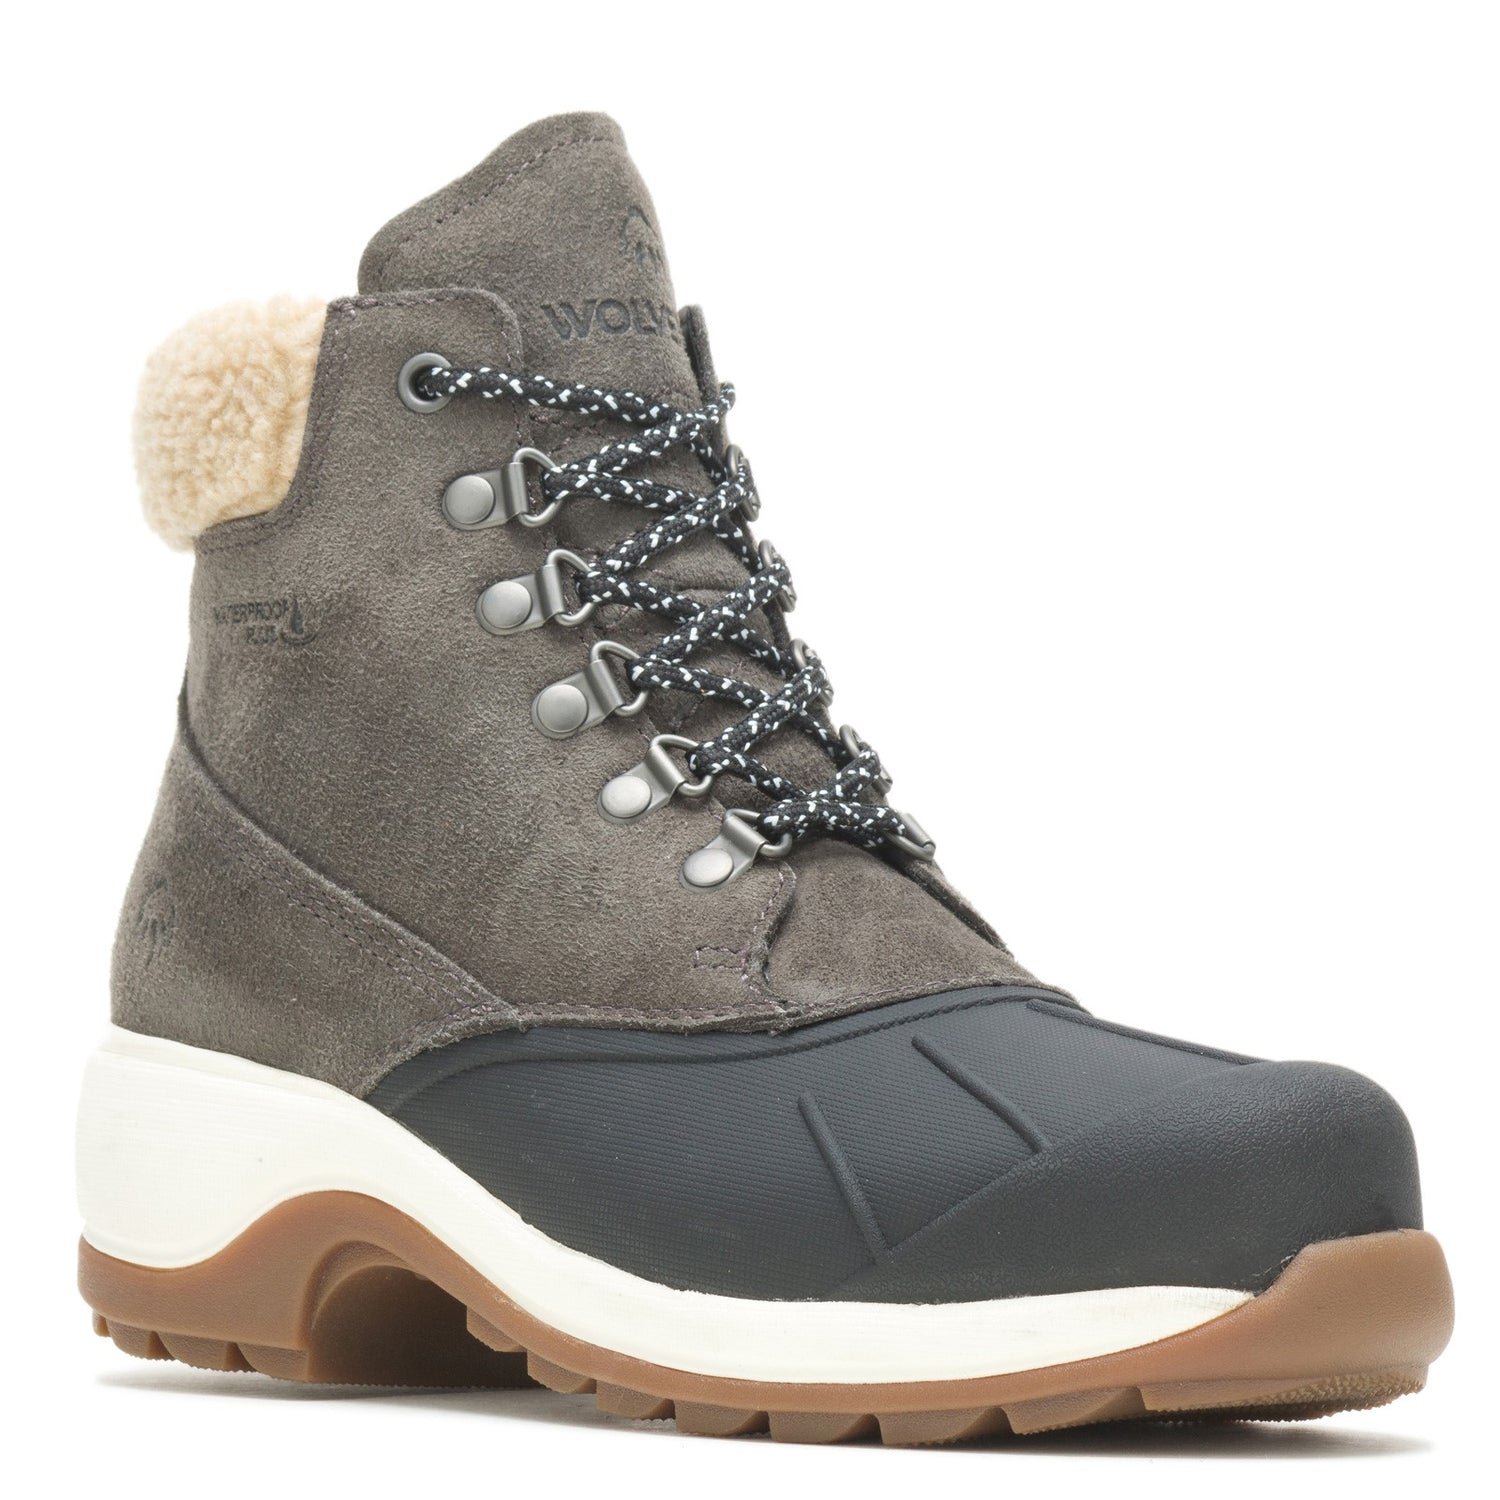 Peltz Shoes  Women's Wolverine Frost Insulated Boot GRAY SUEDE W880214